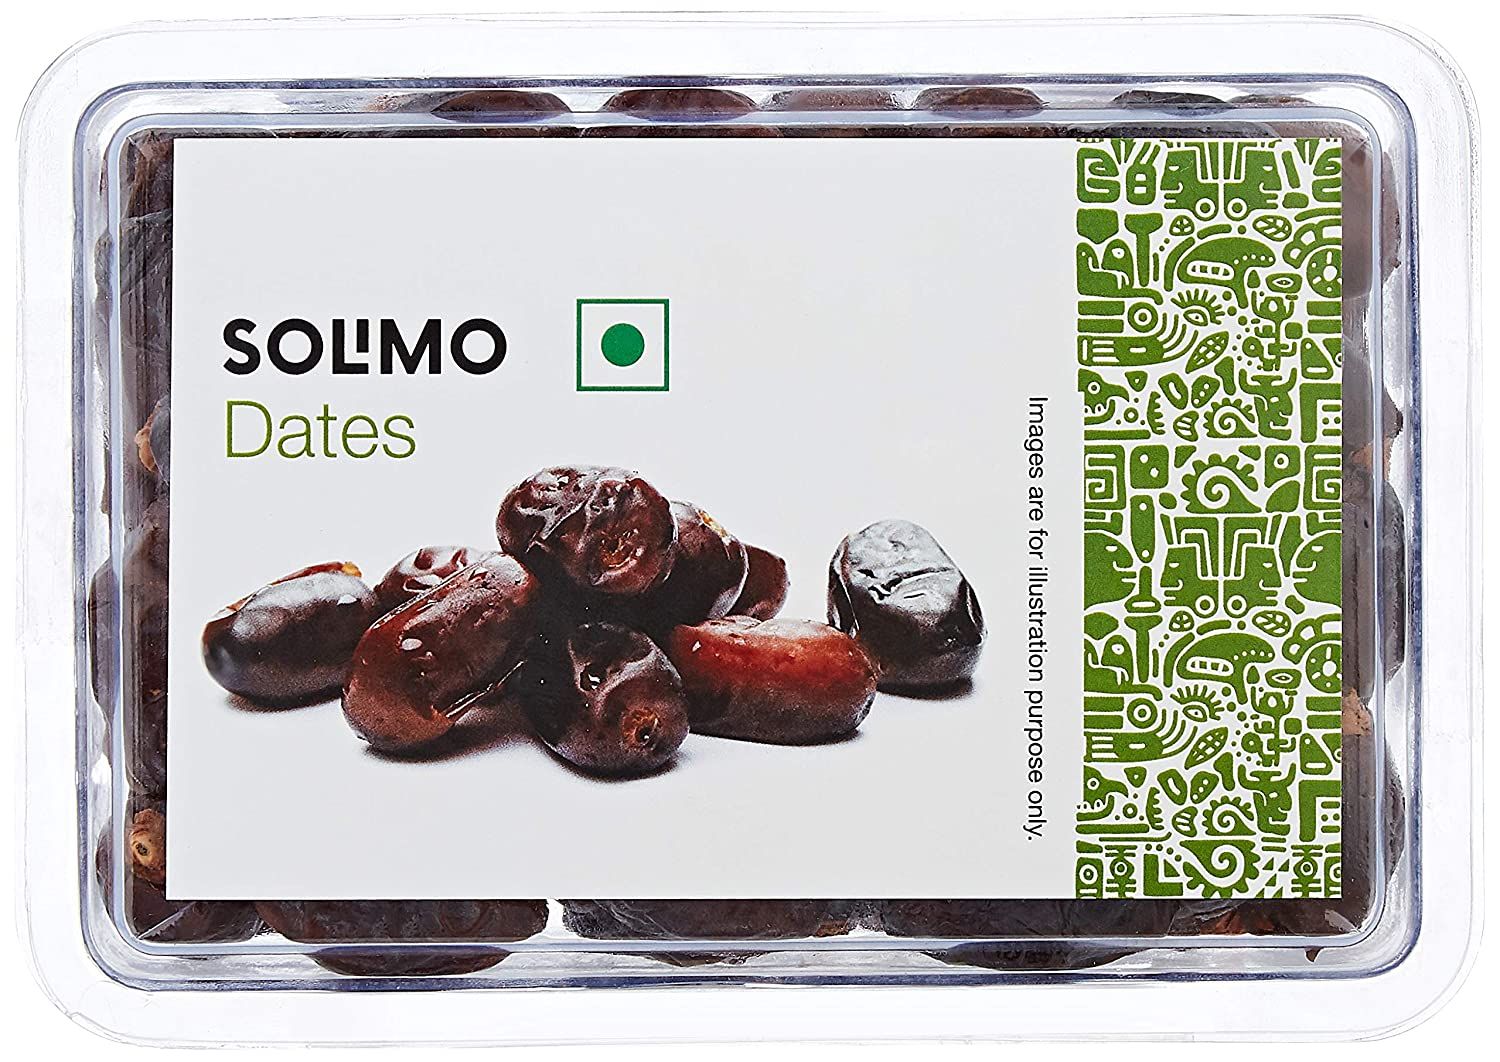 Solimo Dates Image